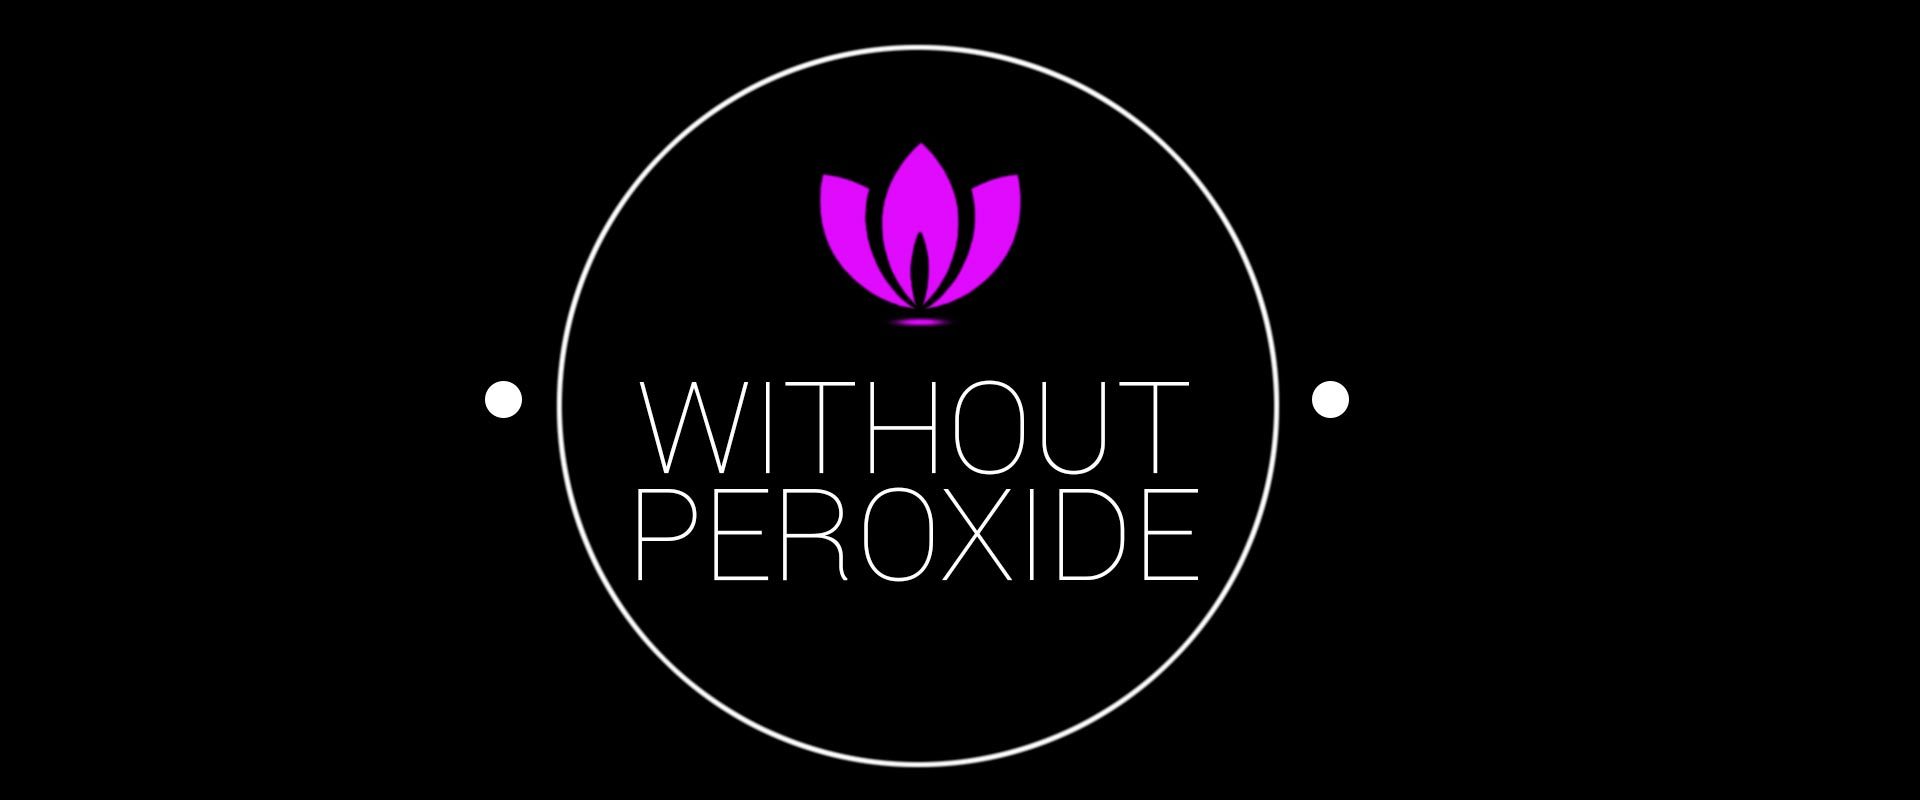 WITHOUT PEROXIDE  COMPLETELY SAFE TO USE